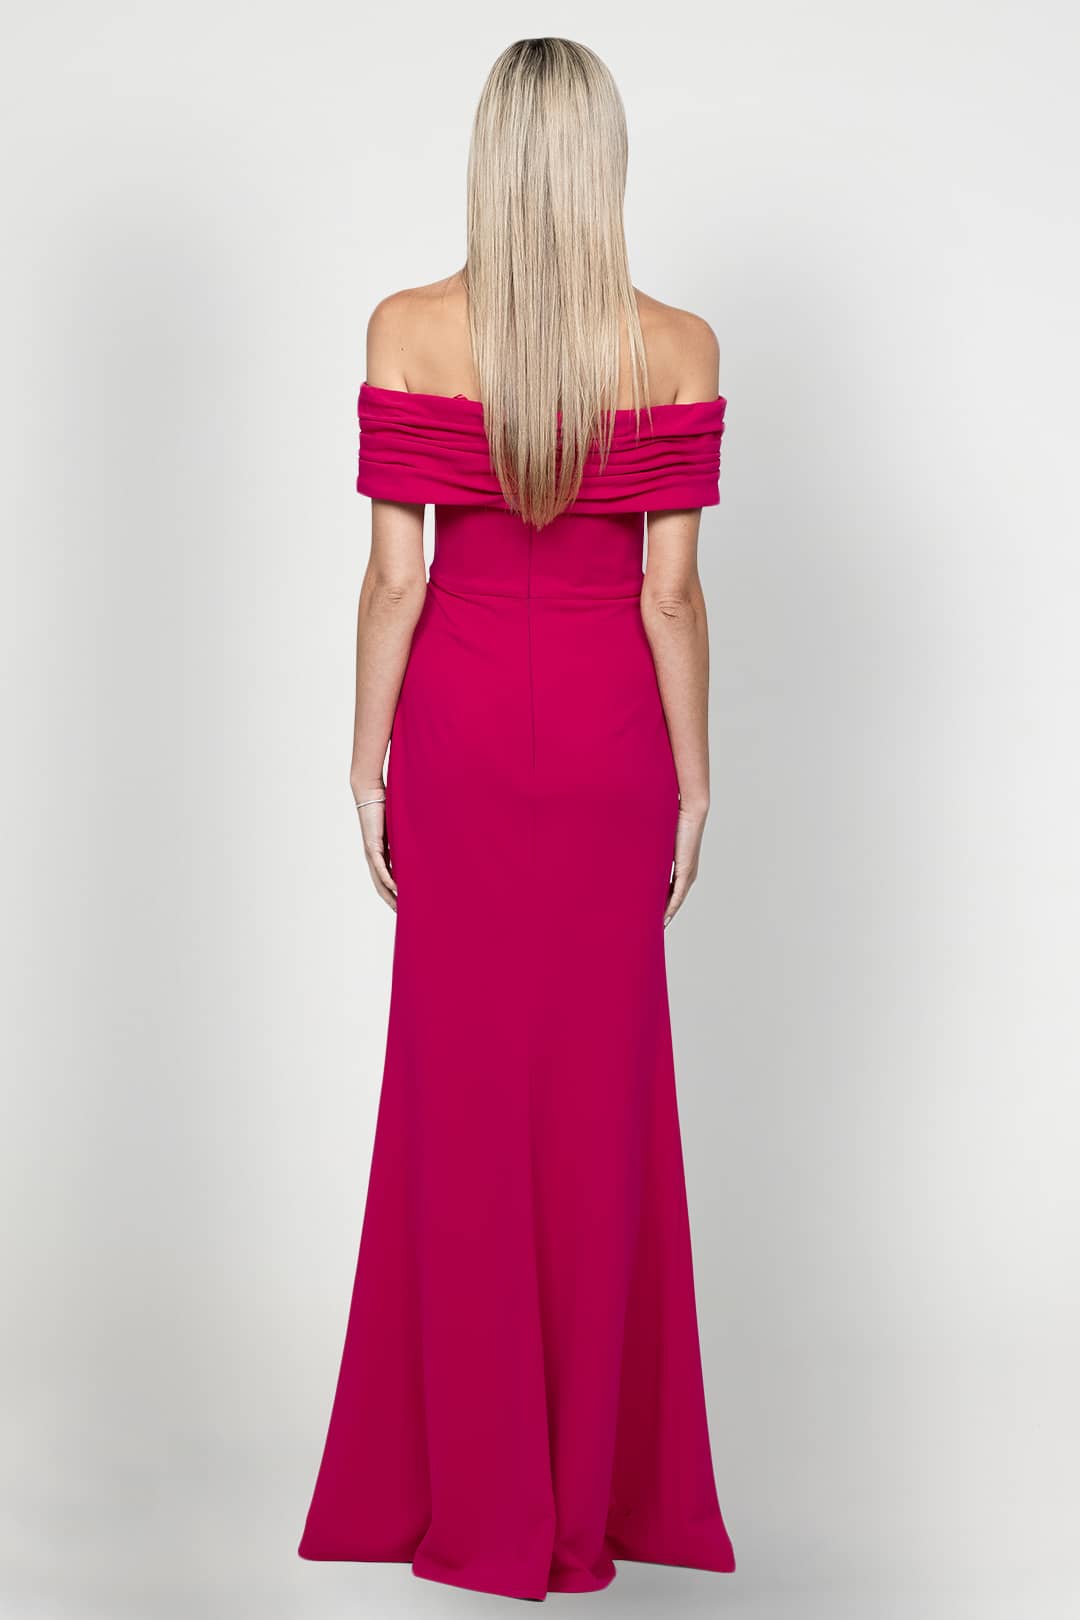 Quinny Pink Gown - Bariano Rent A Dress Pink Gown Rental Dress Rental Canada Back